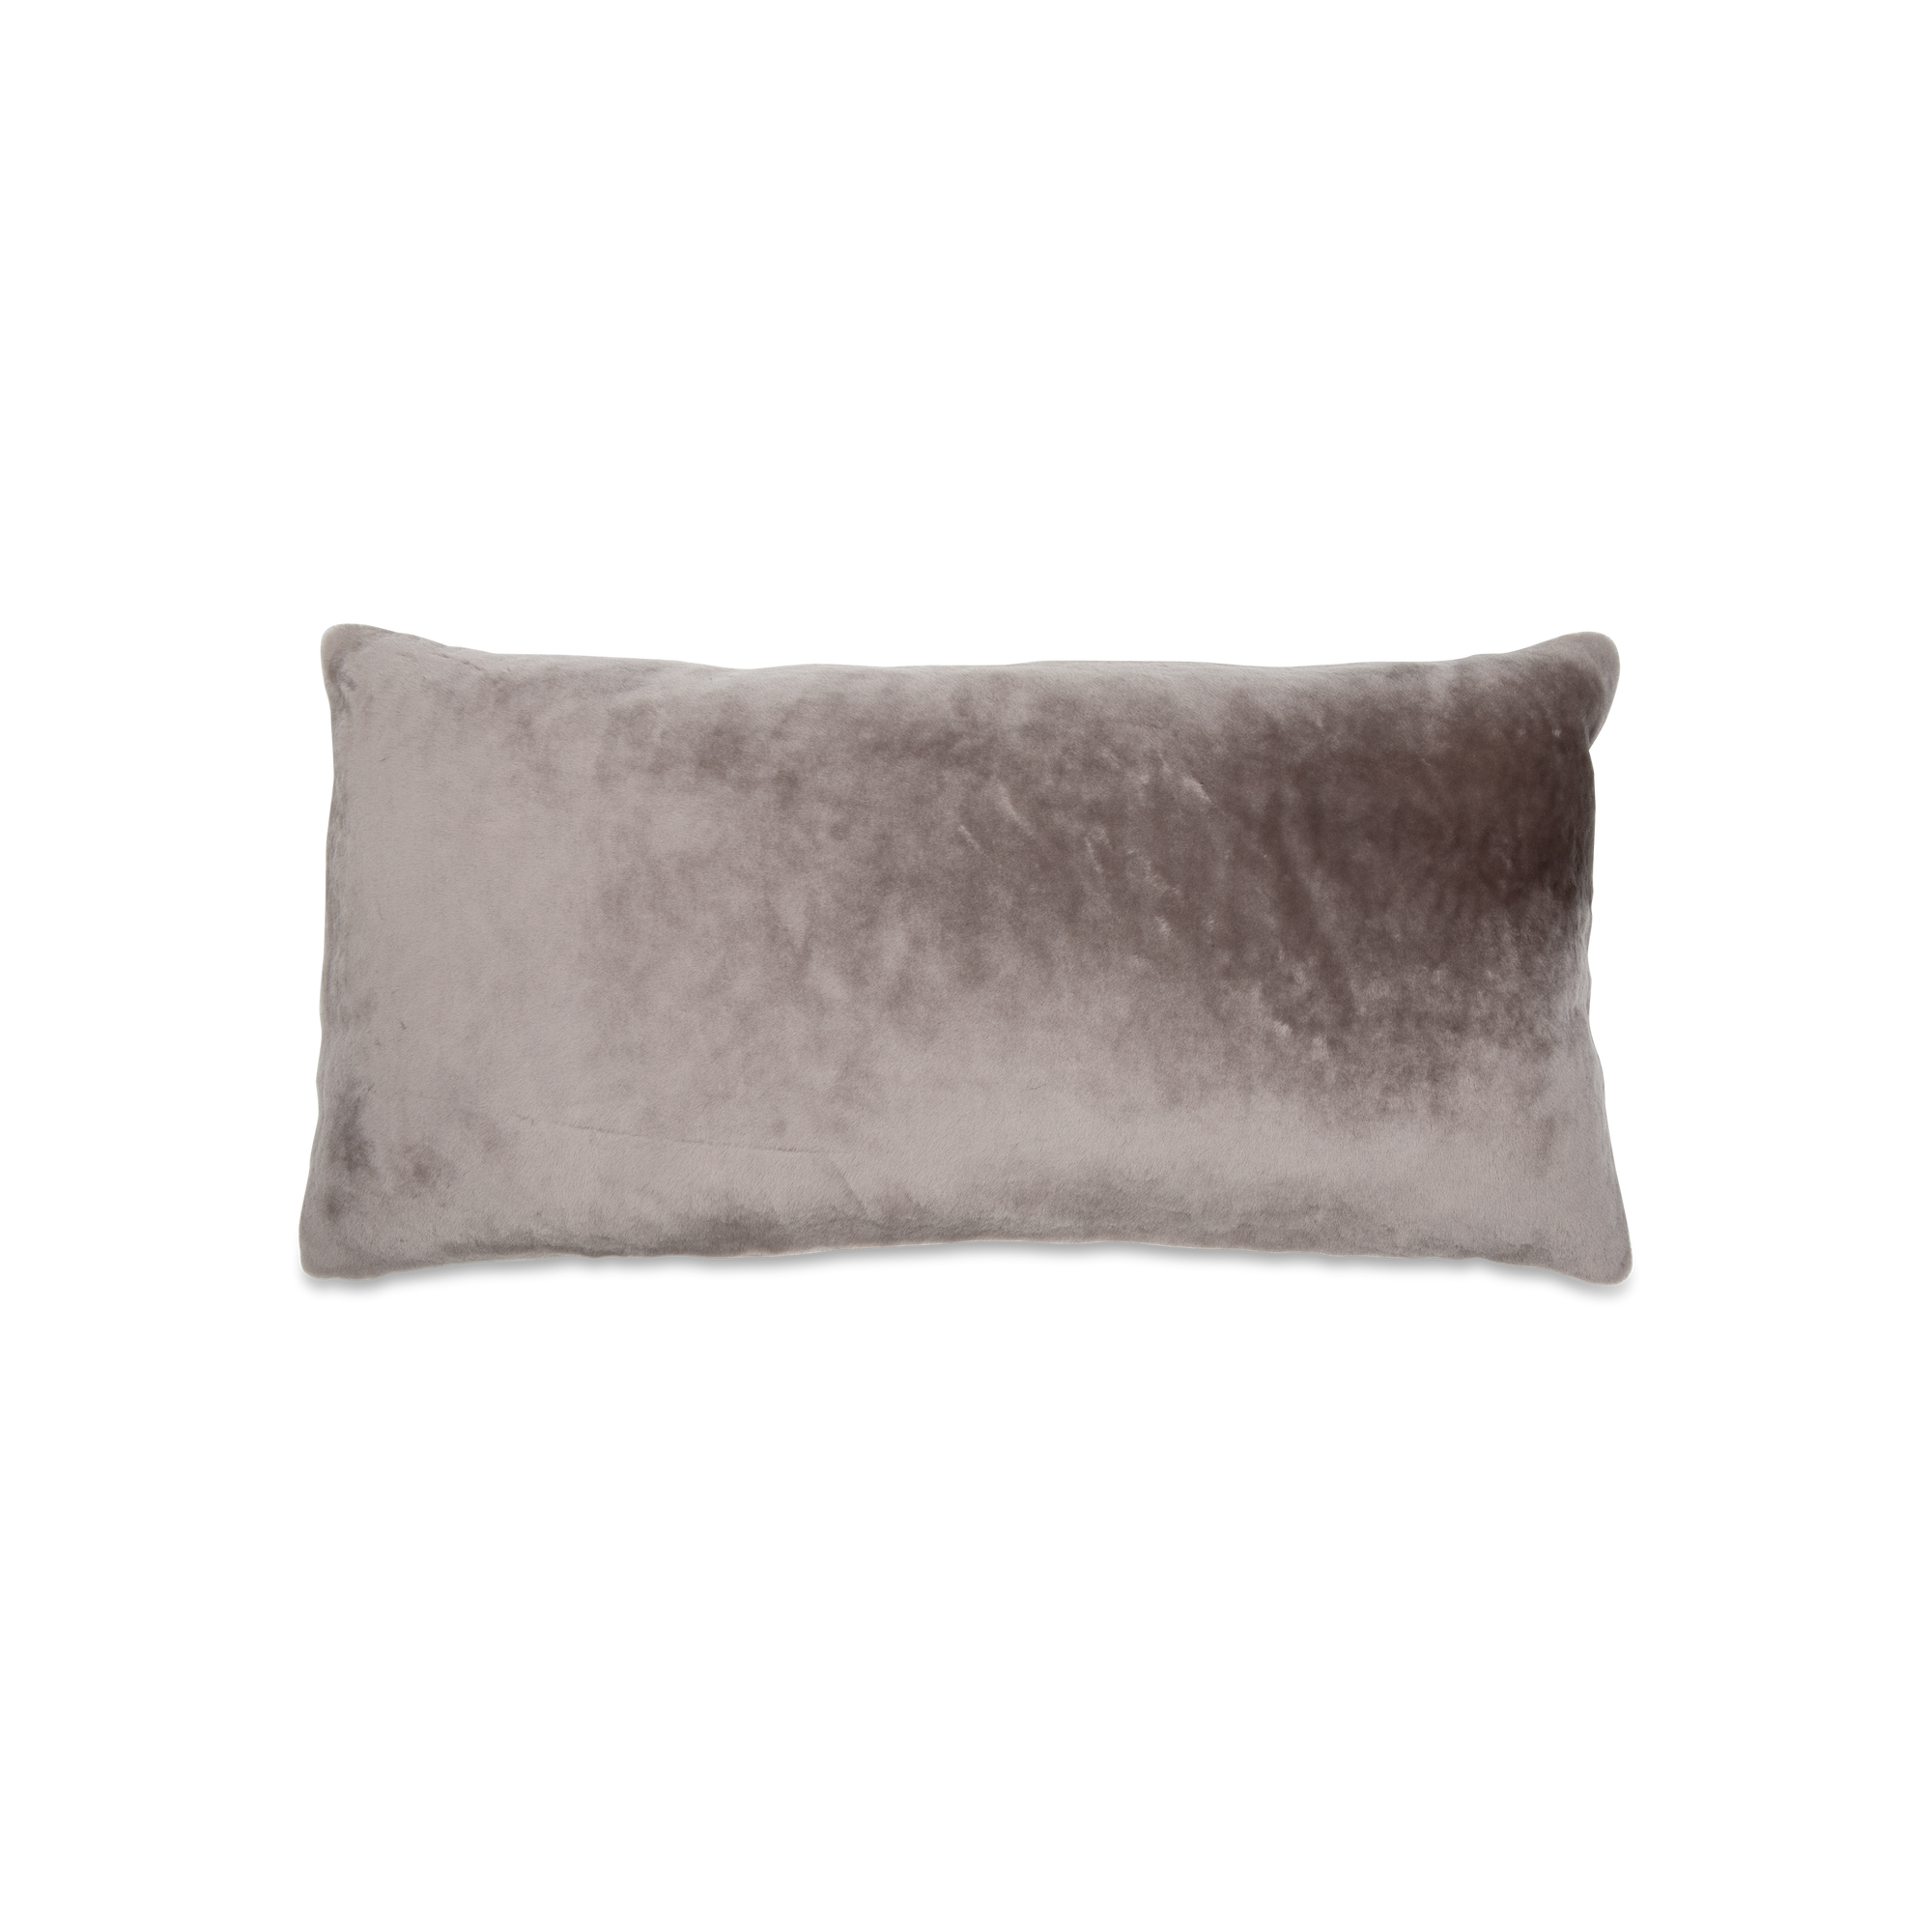 The Shearling Pillow adds a touch of texture to your space